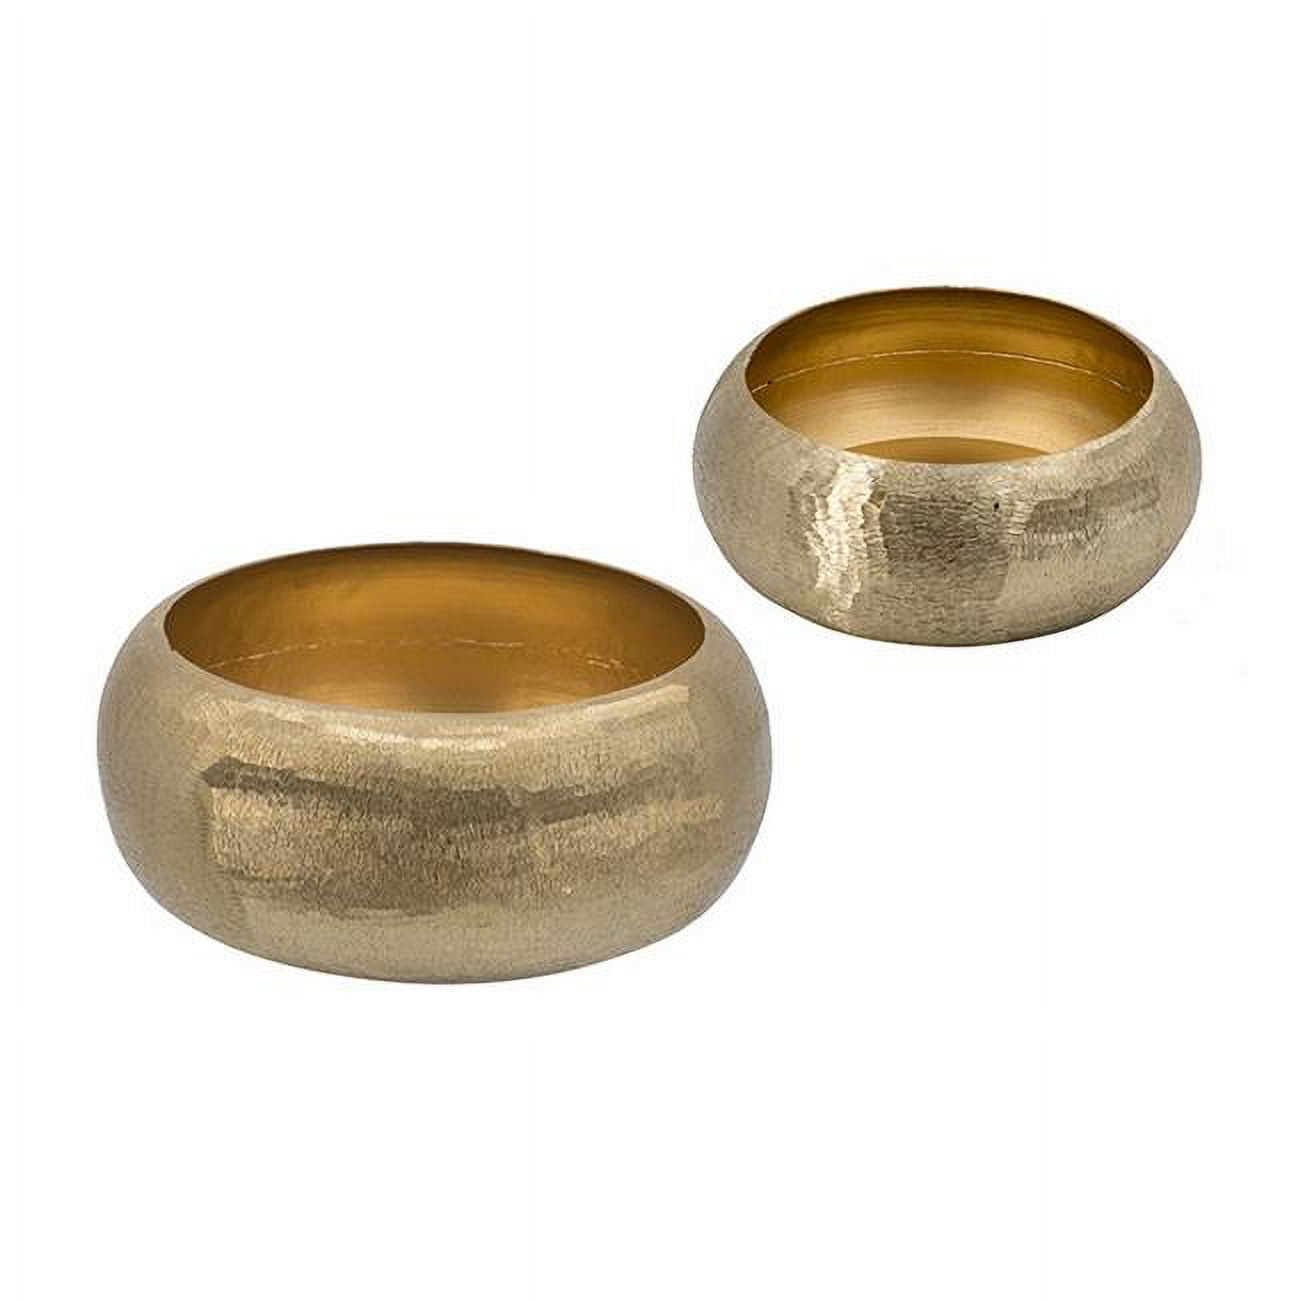 Picture of Benjara BM302554 Gold Metal Hammered Texture & Wide Ingress Rounded Decorative Bowls - 2 Piece